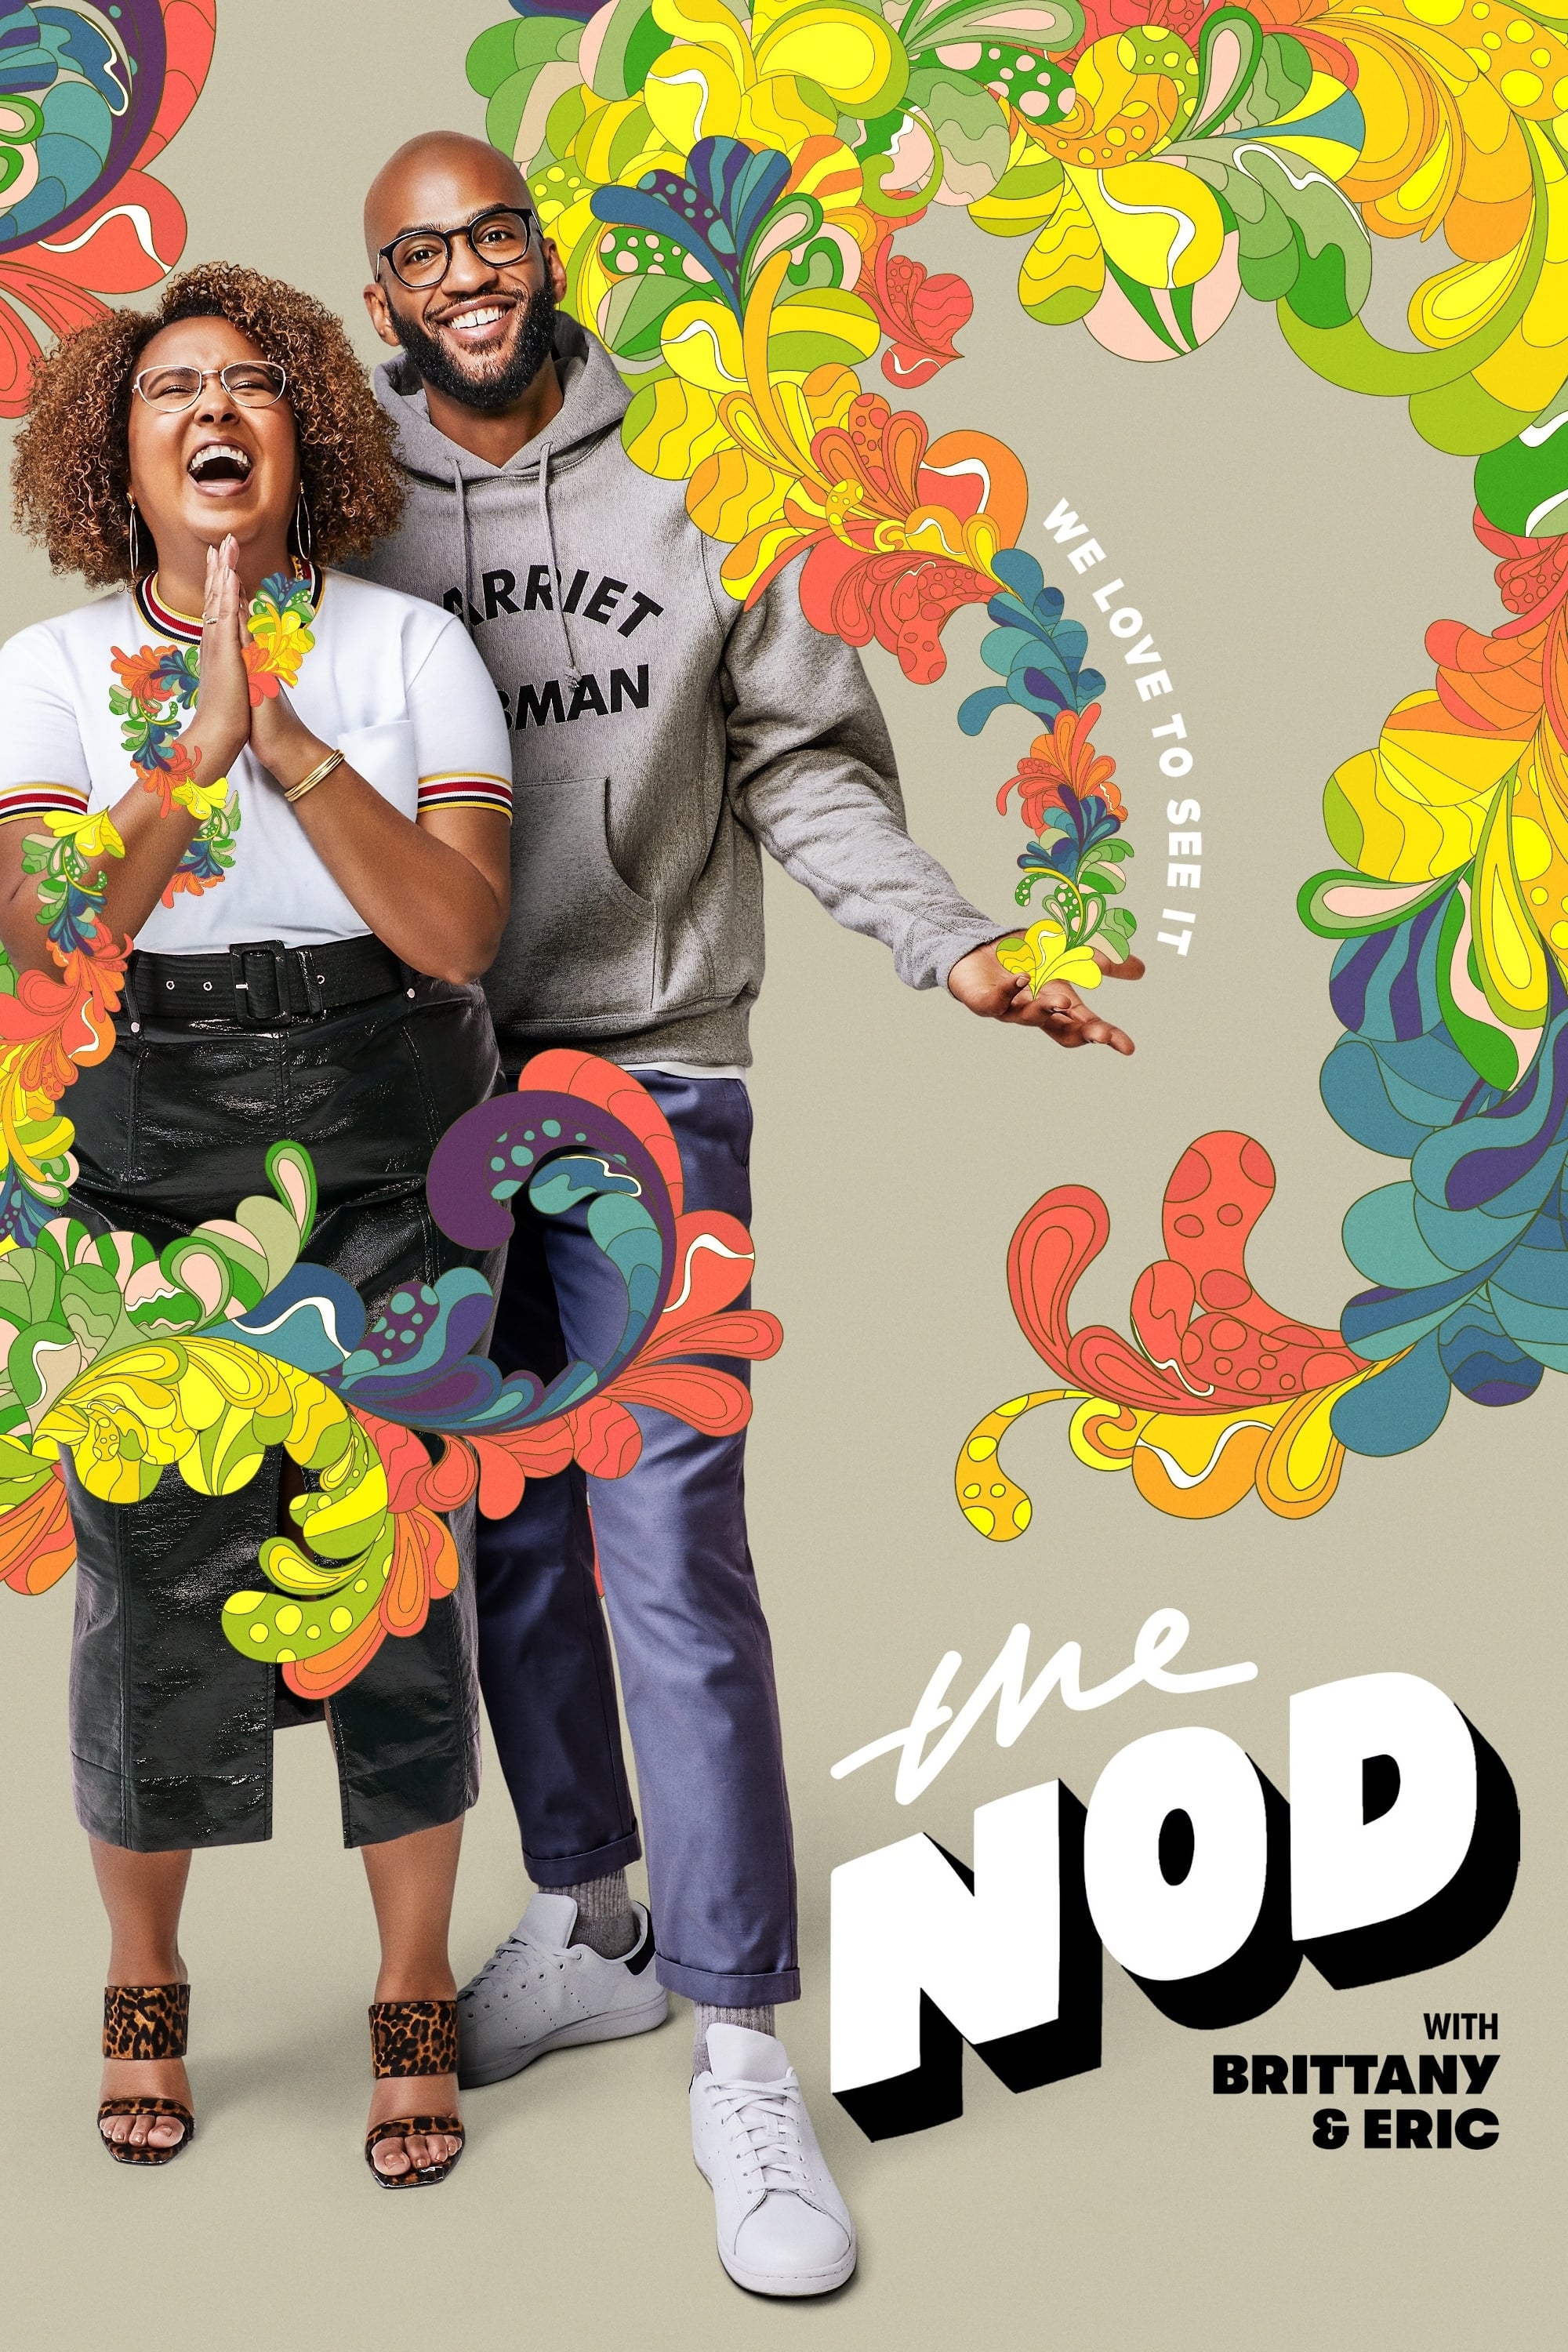 The Nod with Brittany & Eric